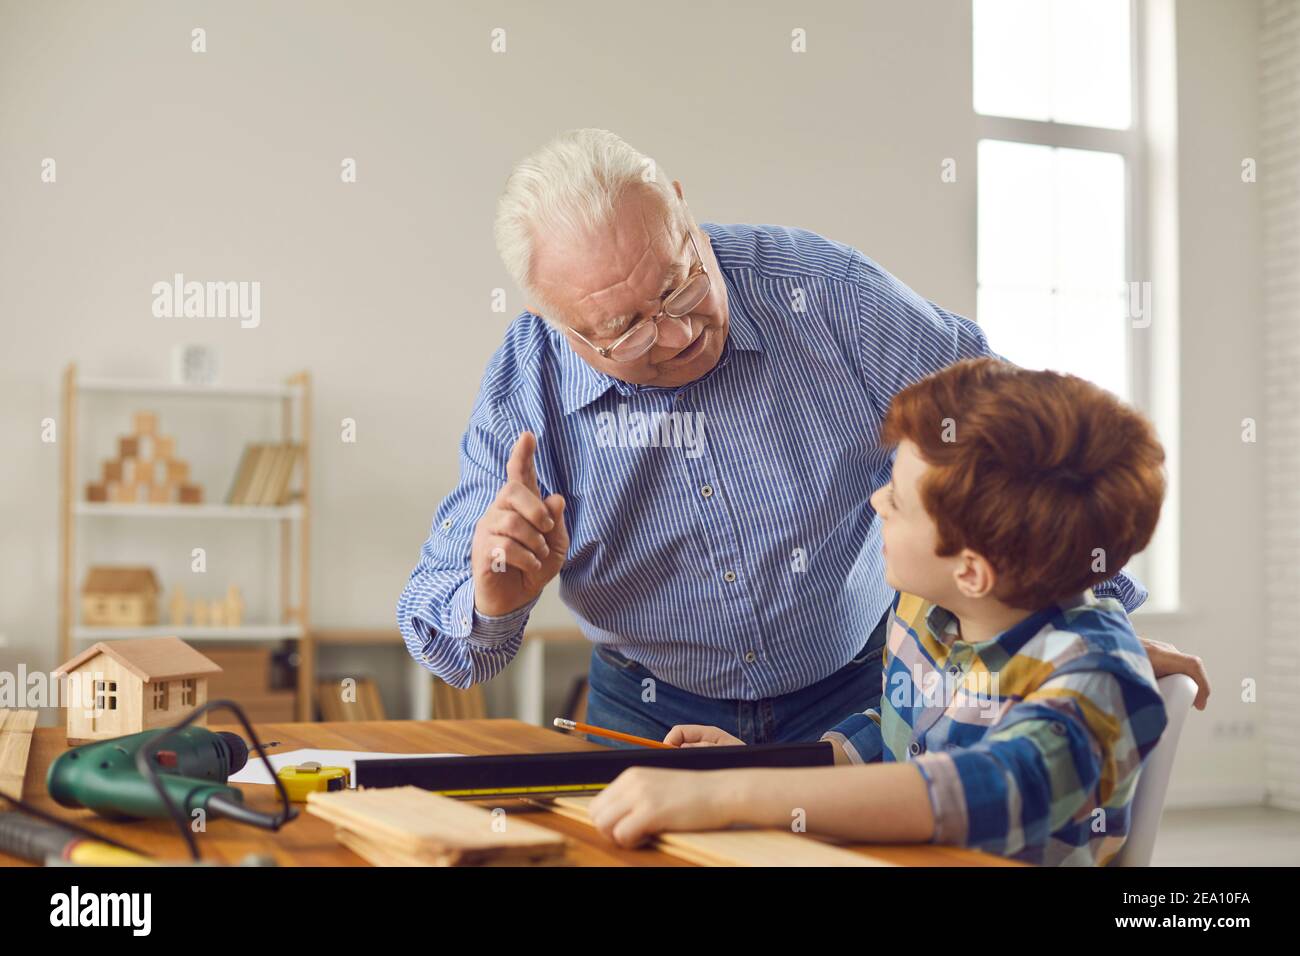 Wise grandfather reminds grandson of safety precautions when working at the workshop Stock Photo